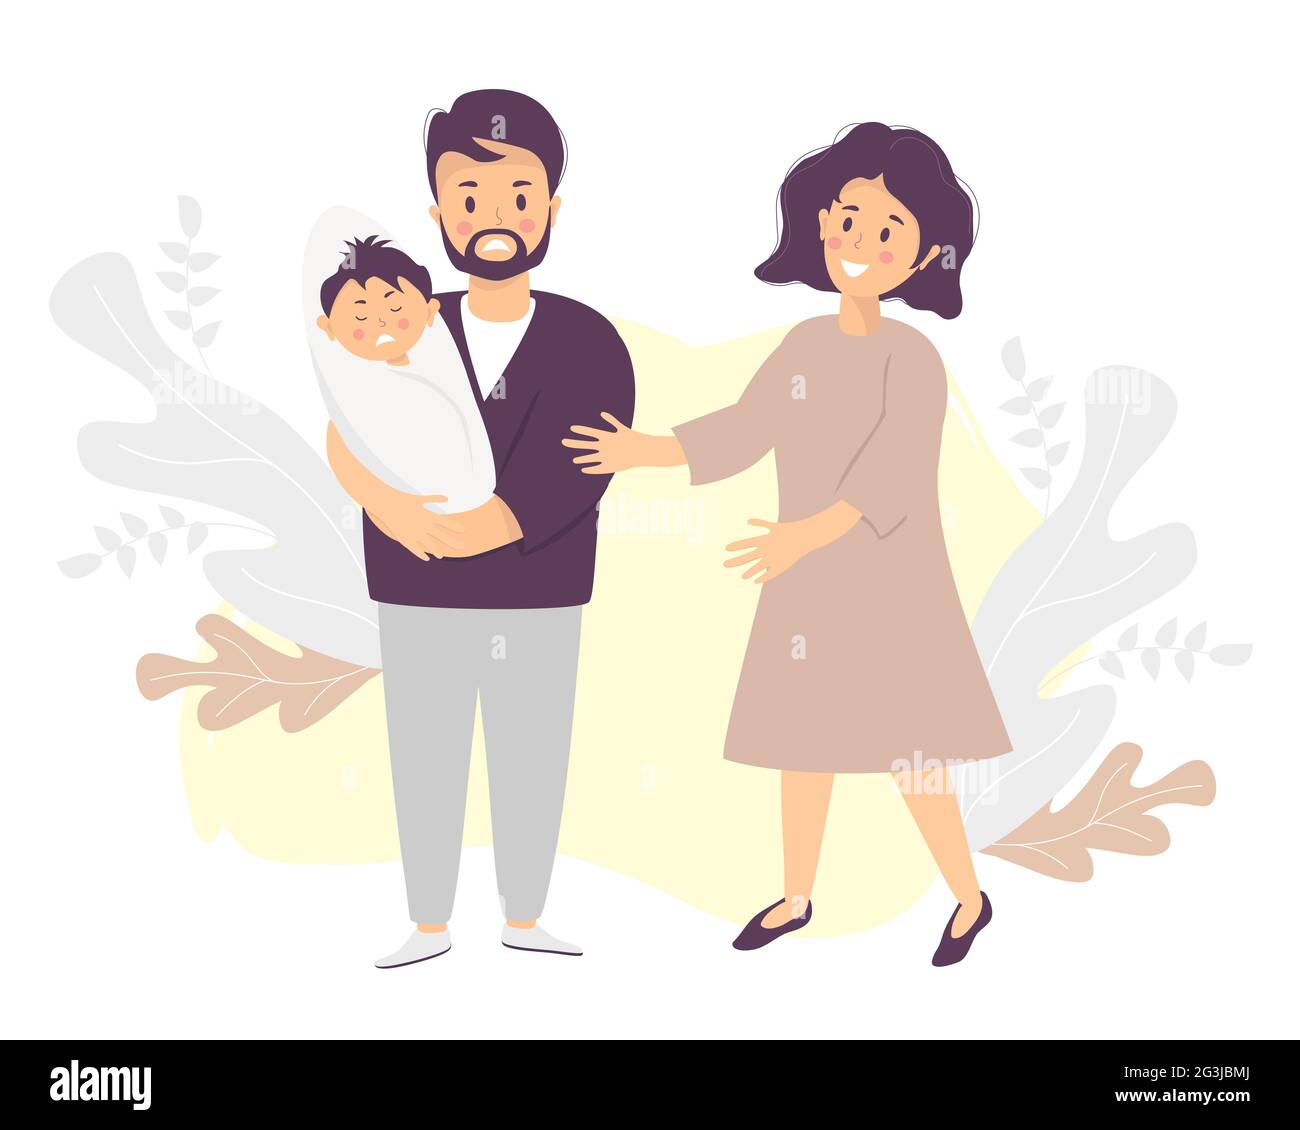 Family life and emotions concept. A sad man holds a crying baby in his arms. Nearby, a woman smiles and comforts. Vector illustration. Light-skinned f Stock Vector